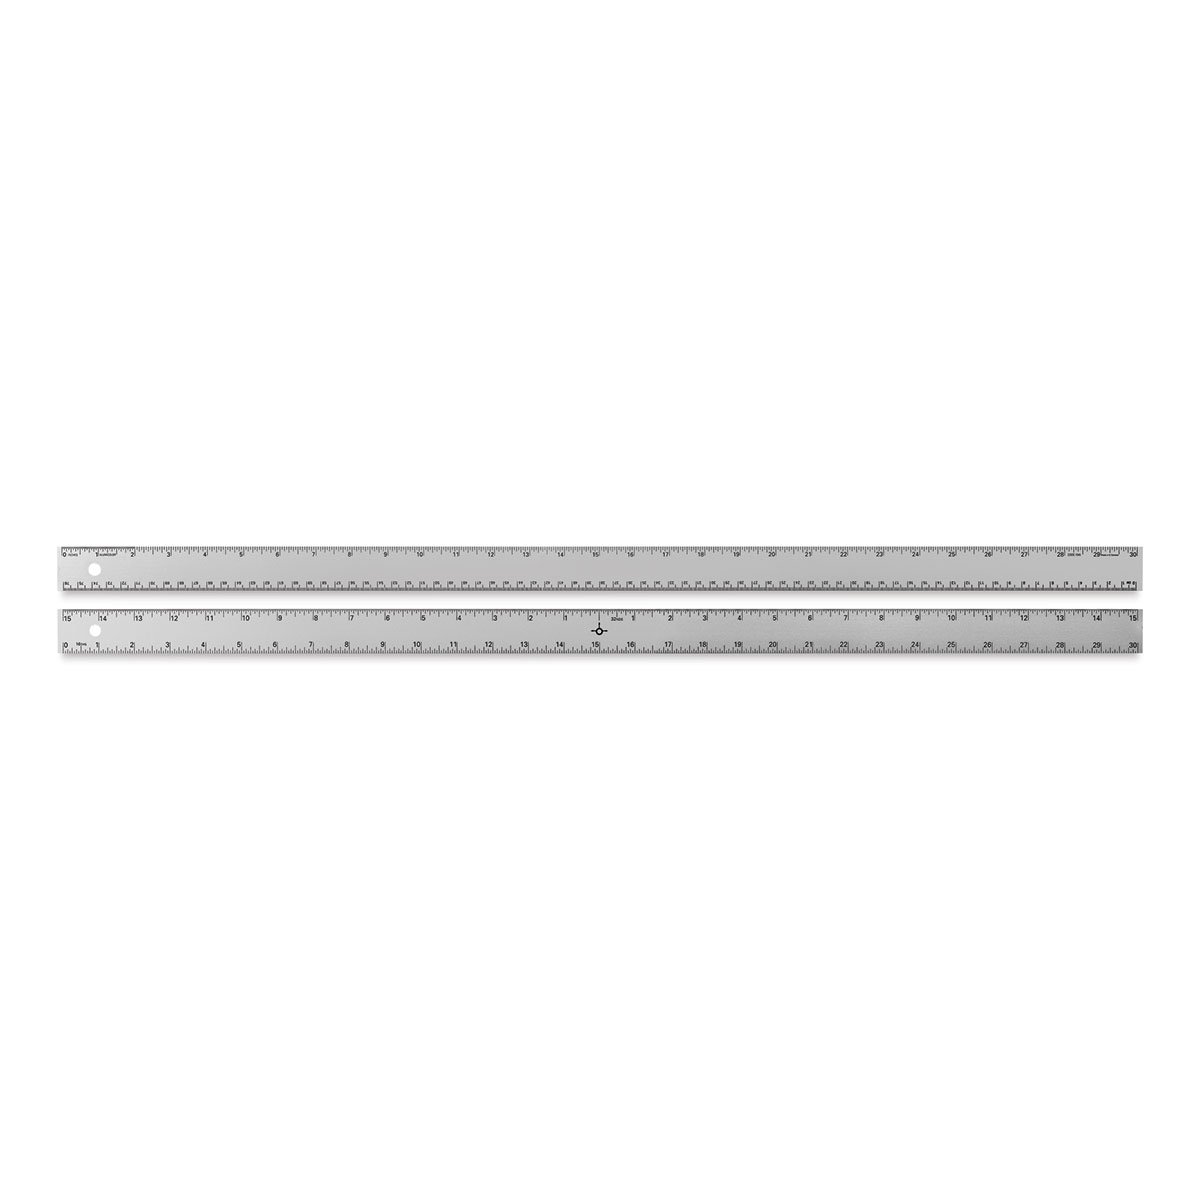 Alumicolor Stainless Steel Cork Backed Rulers